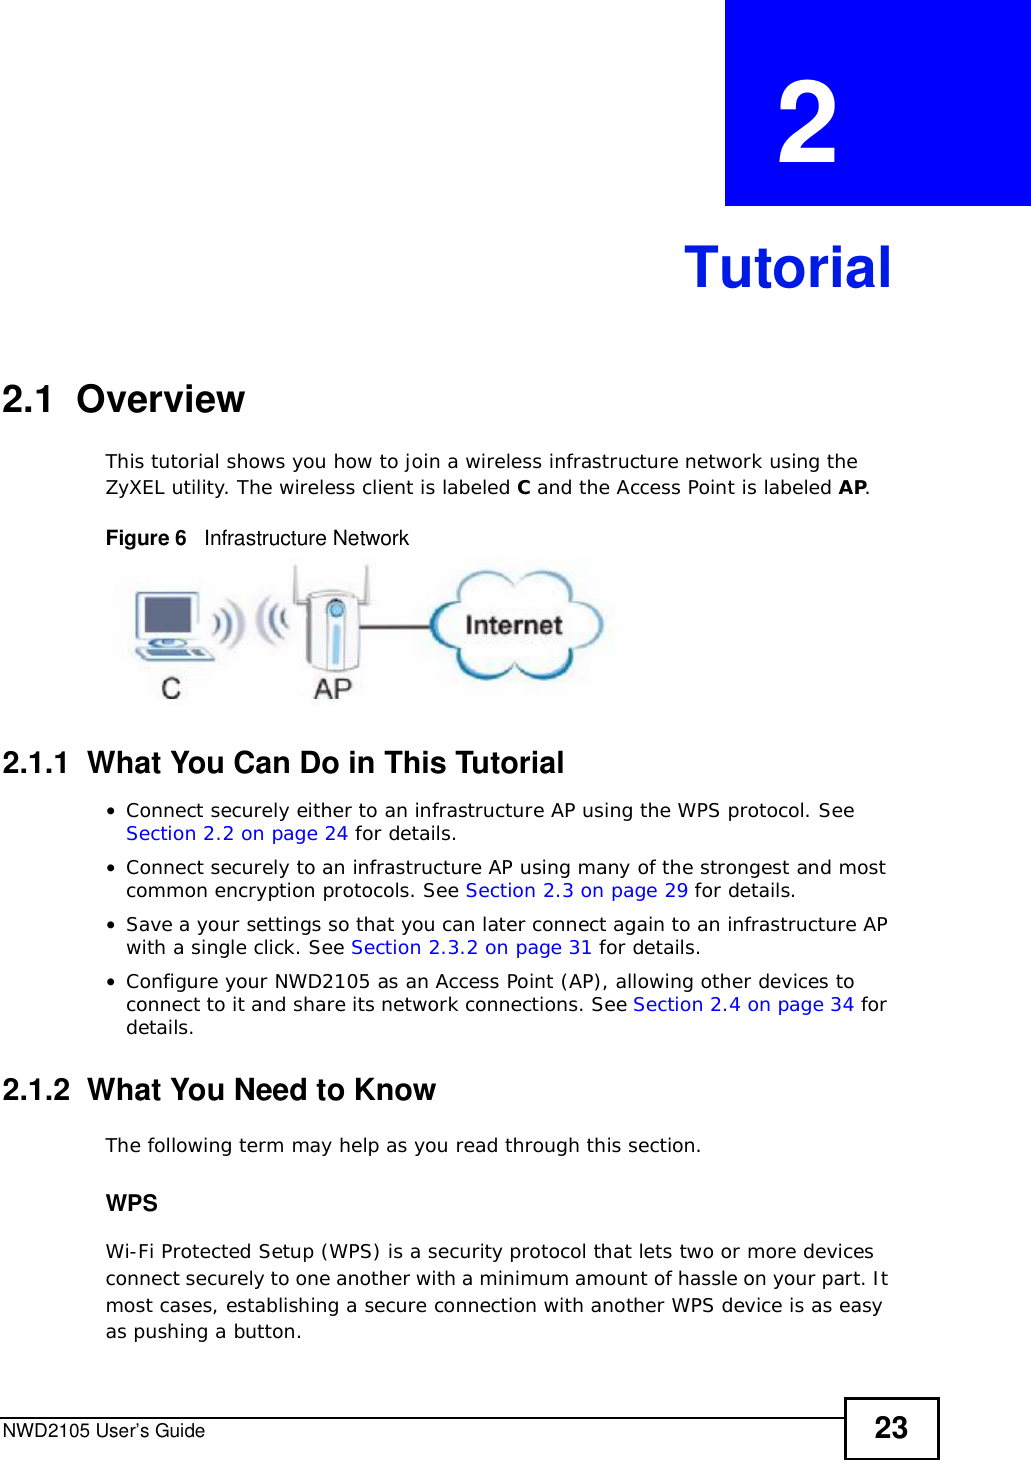 NWD2105 User’s Guide 23CHAPTER  2 Tutorial2.1  OverviewThis tutorial shows you how to join a wireless infrastructure network using the ZyXEL utility. The wireless client is labeled C and the Access Point is labeled AP.Figure 6   Infrastructure Network2.1.1  What You Can Do in This Tutorial•Connect securely either to an infrastructure AP using the WPS protocol. See Section 2.2 on page 24 for details.•Connect securely to an infrastructure AP using many of the strongest and most common encryption protocols. See Section 2.3 on page 29 for details.•Save a your settings so that you can later connect again to an infrastructure AP with a single click. See Section 2.3.2 on page 31 for details.•Configure your NWD2105 as an Access Point (AP), allowing other devices to connect to it and share its network connections. See Section 2.4 on page 34 for details.2.1.2  What You Need to KnowThe following term may help as you read through this section.WPSWi-Fi Protected Setup (WPS) is a security protocol that lets two or more devices connect securely to one another with a minimum amount of hassle on your part. It most cases, establishing a secure connection with another WPS device is as easy as pushing a button.